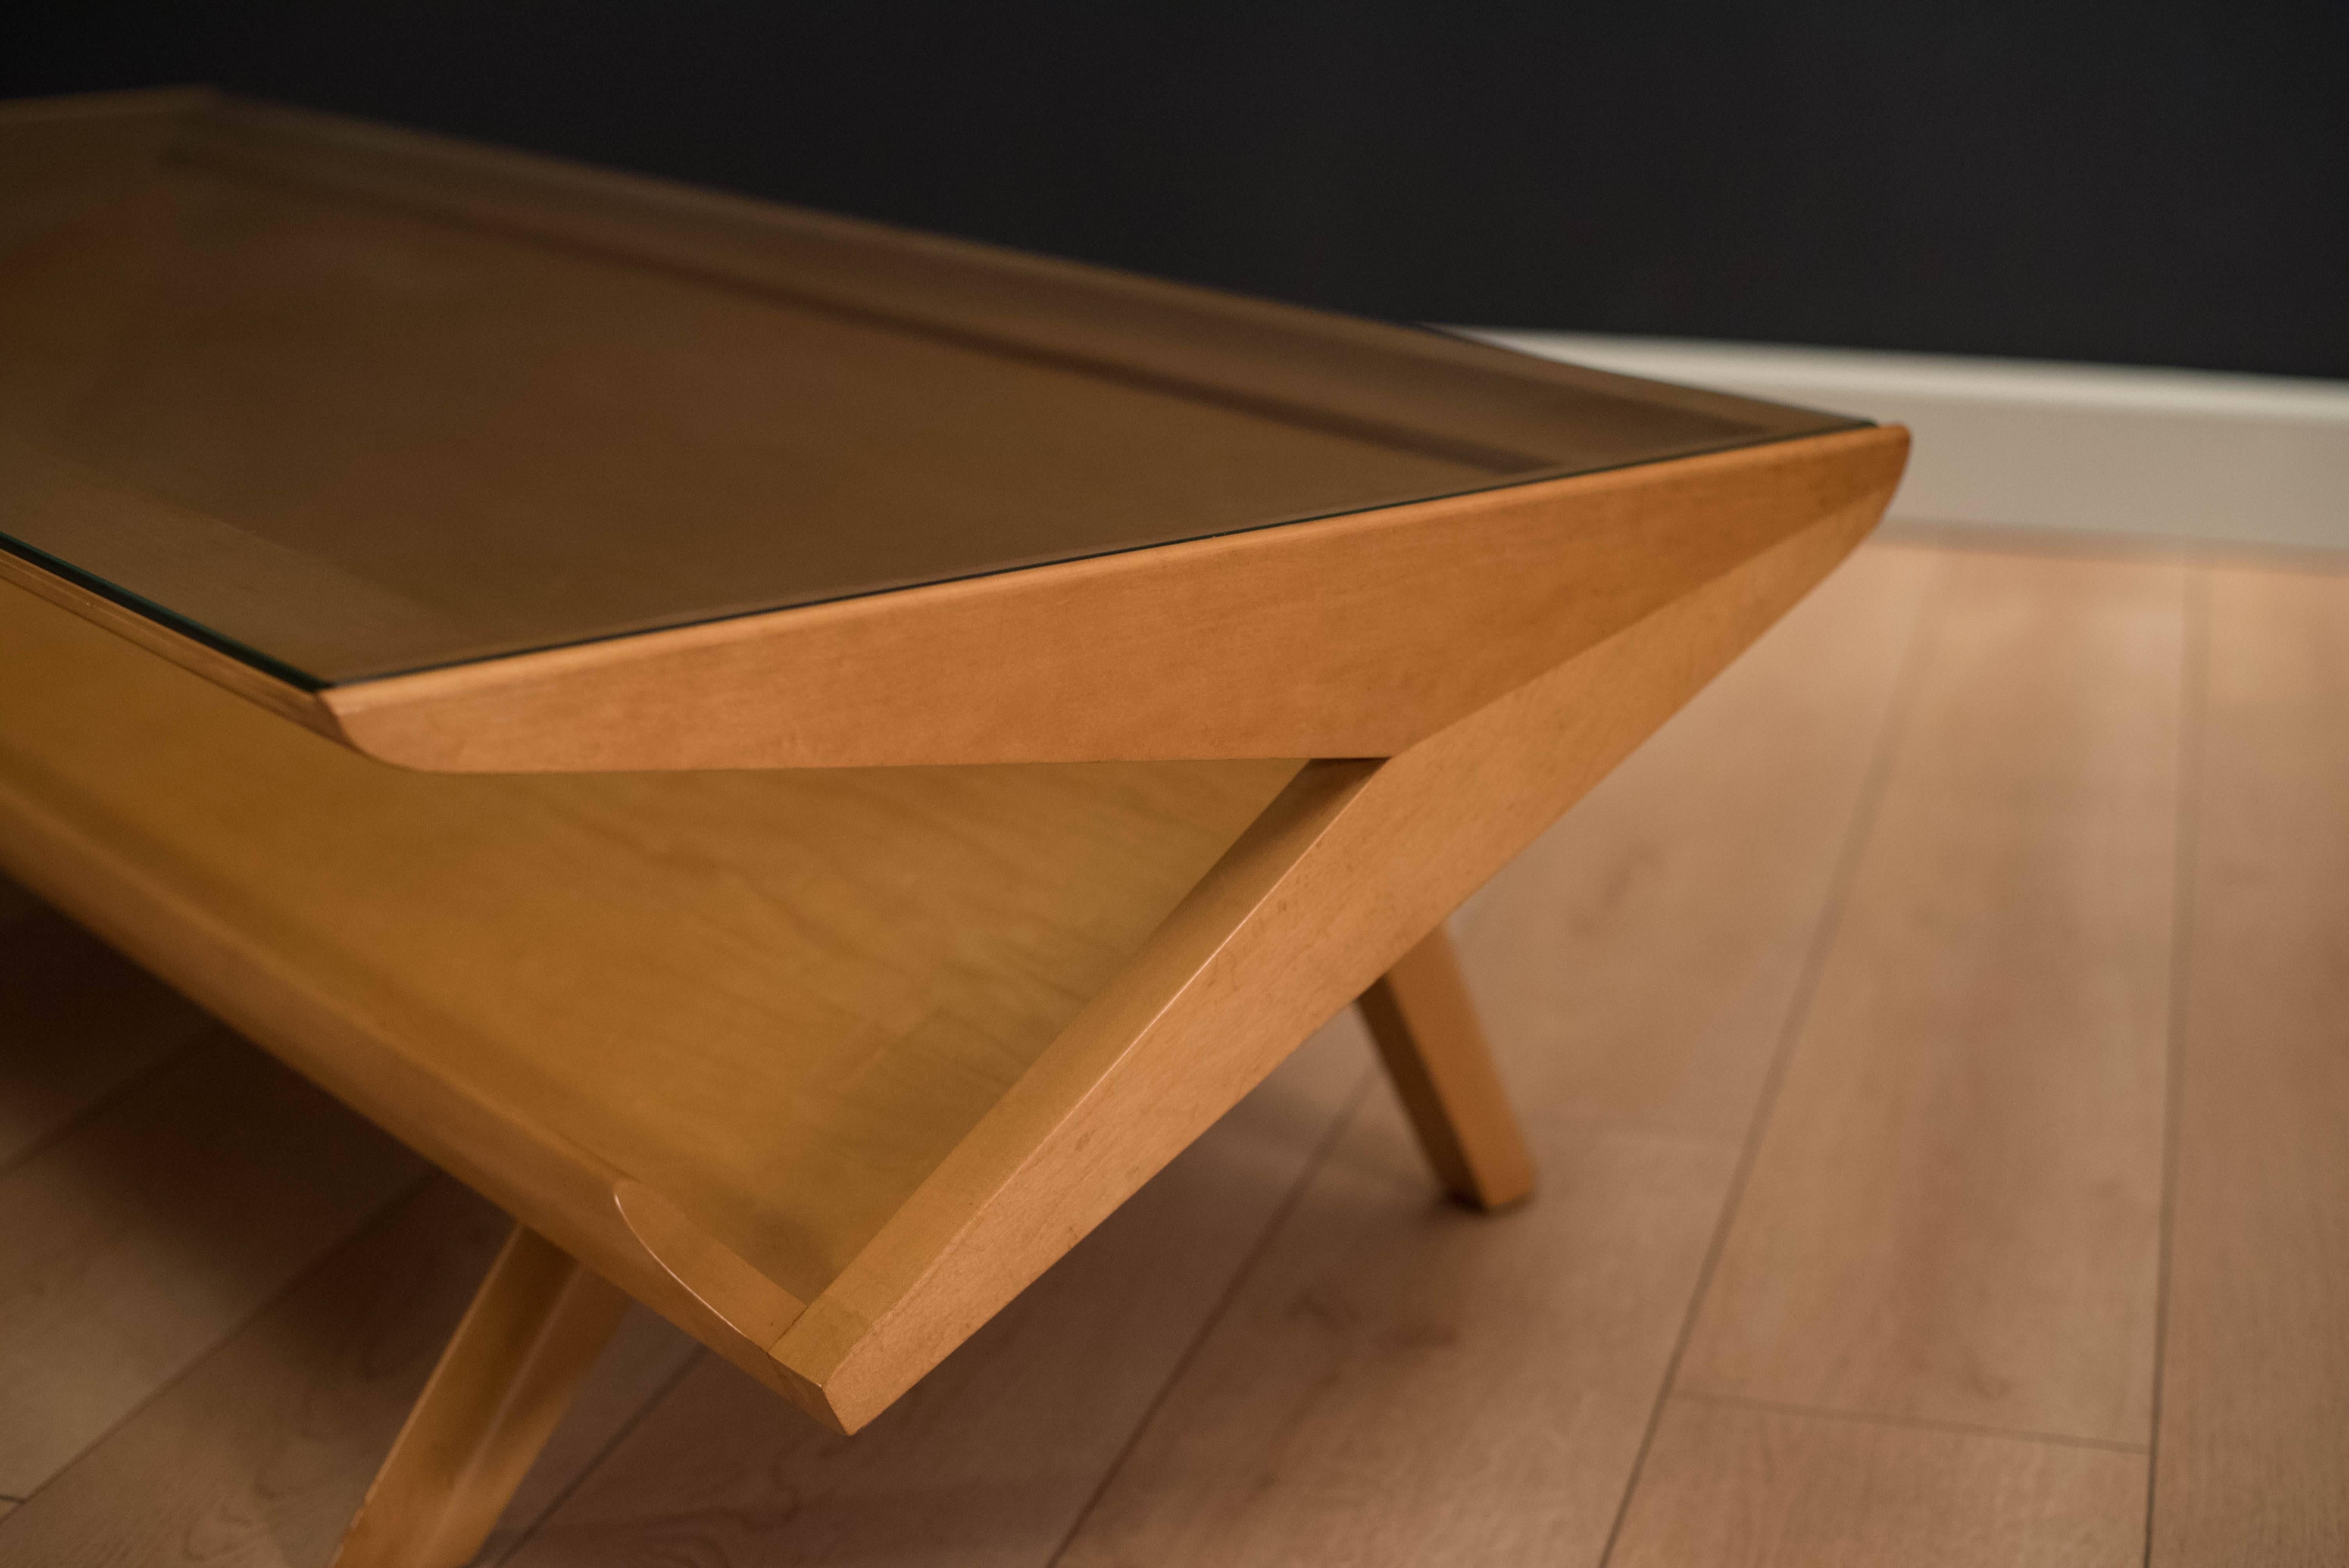 Mid-Century Modern coffee table by John Keal for Brown Saltman. This piece features a lower magazine shelf display and unique splayed legs.